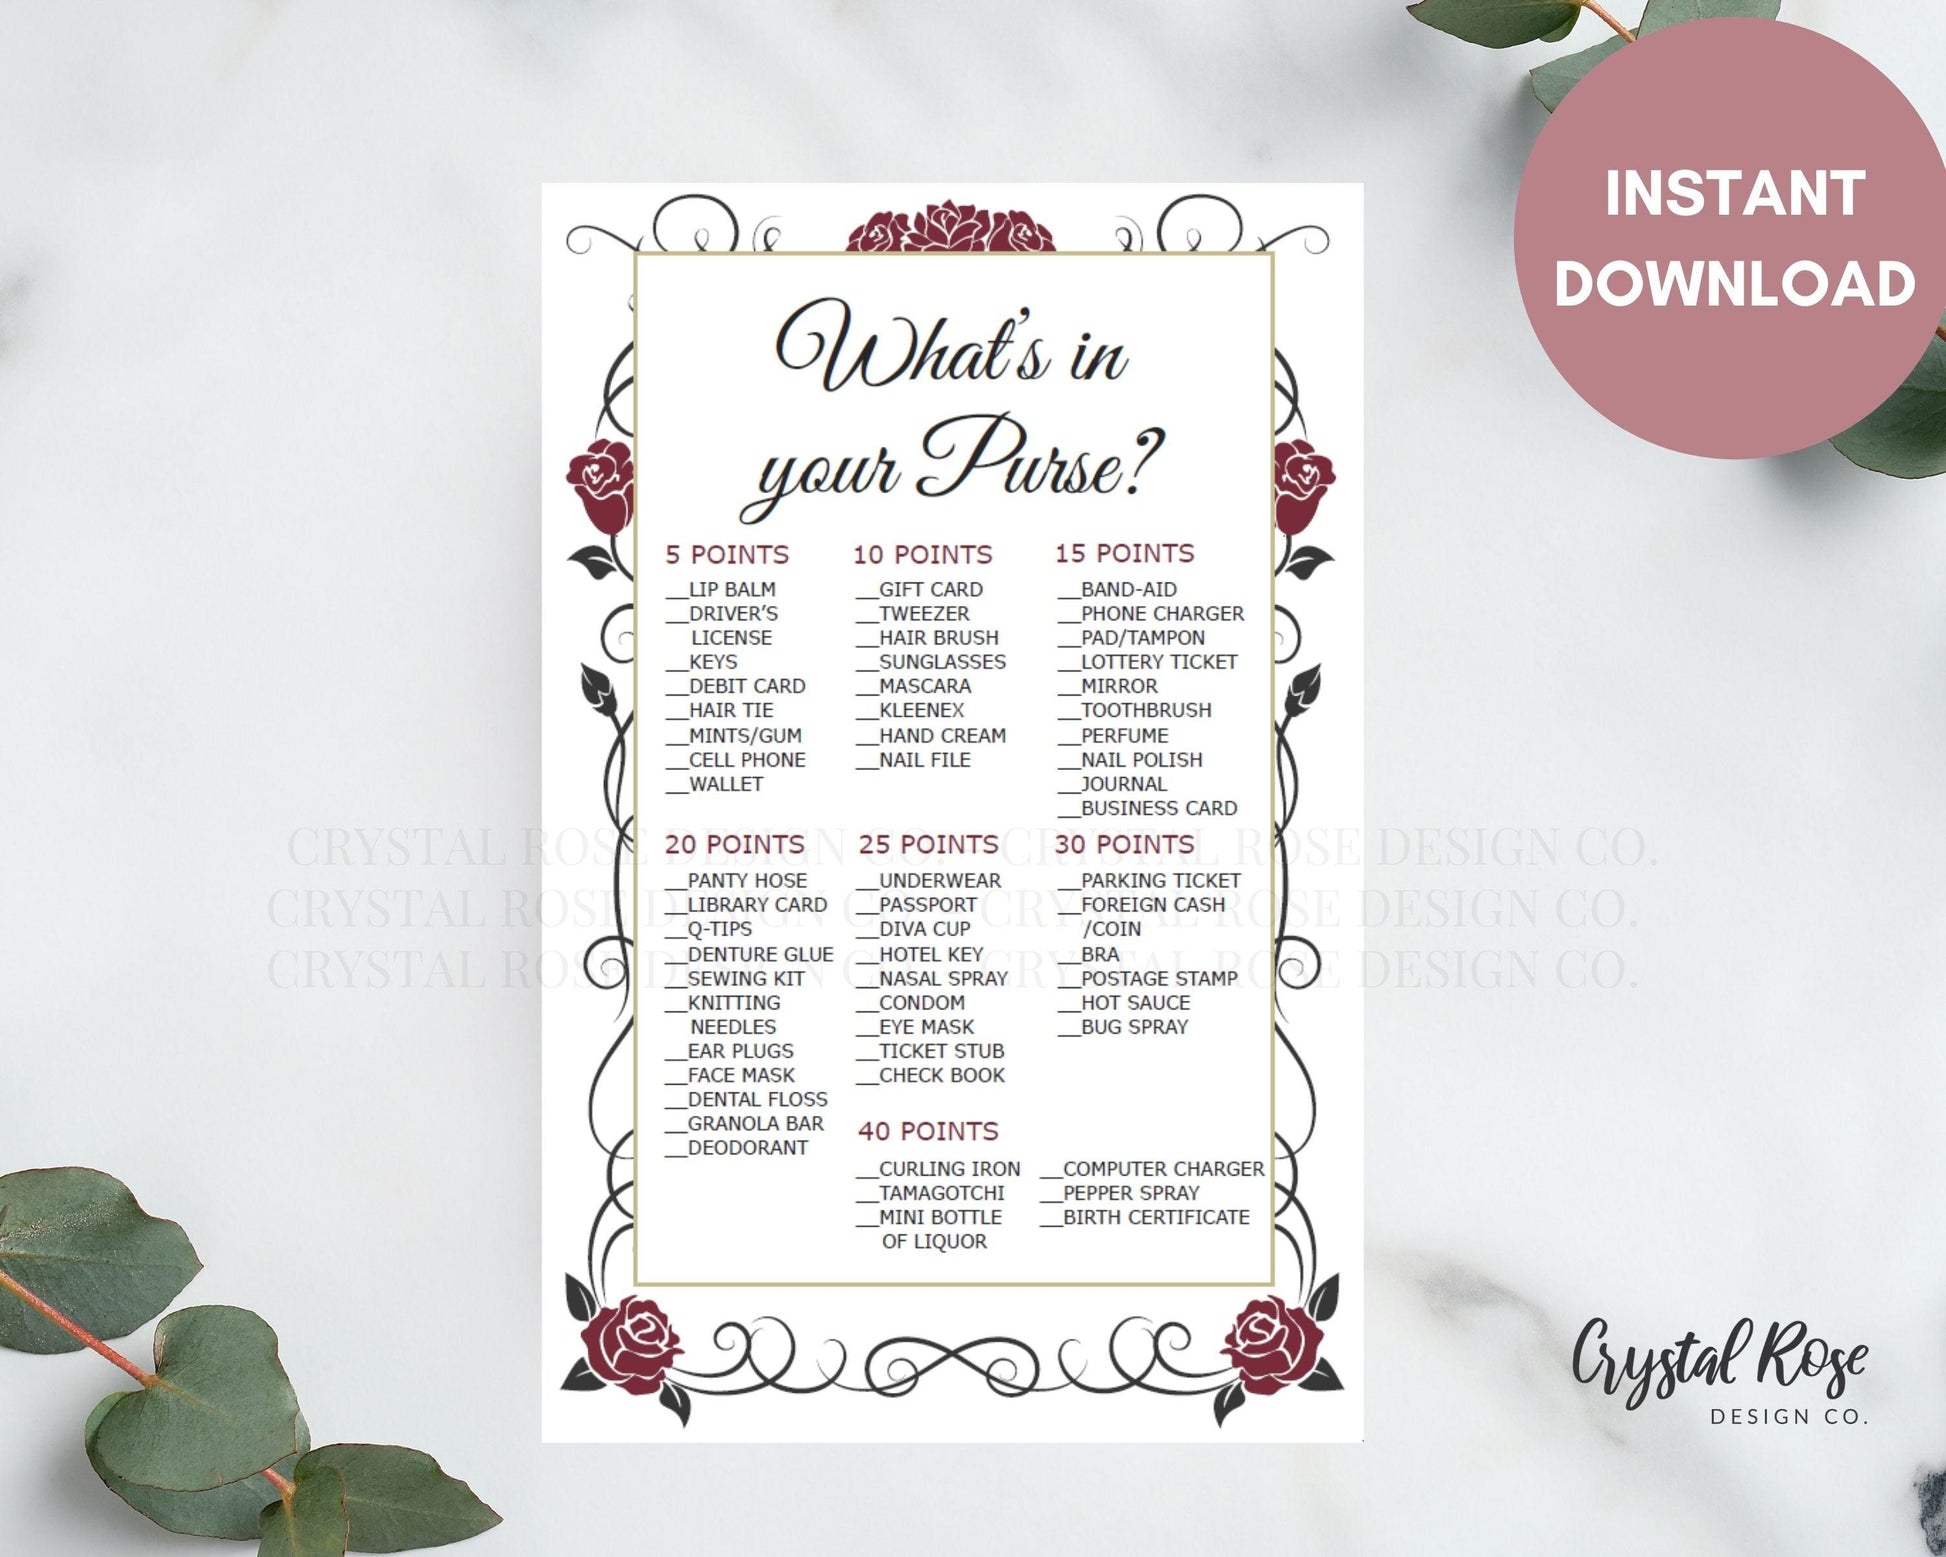 What's in your Purse? Bridal Shower Game - Crystal Rose Design Co.